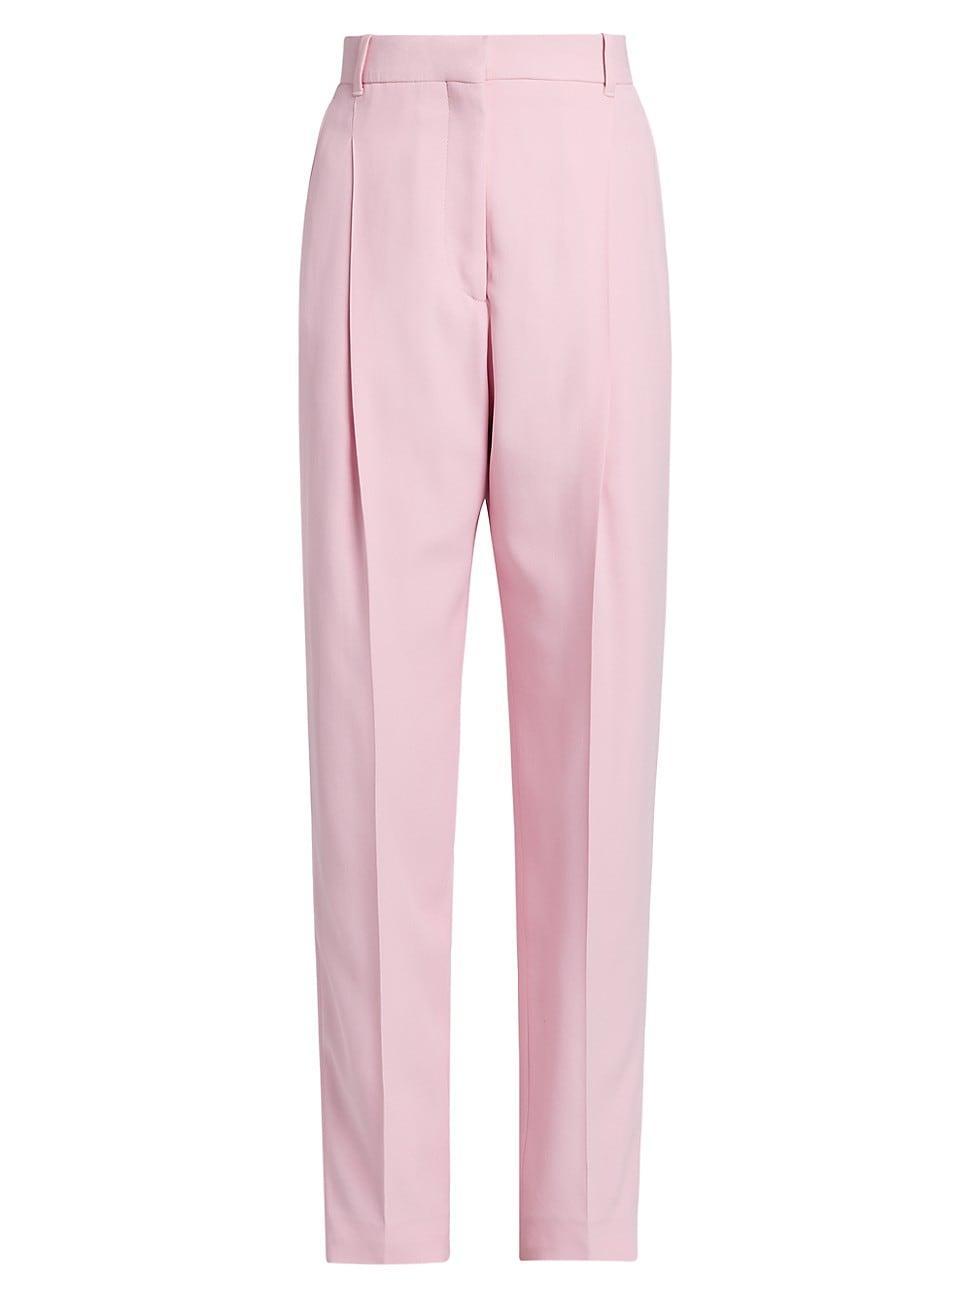 Womens Leaf Crepe Pleated Trousers Product Image